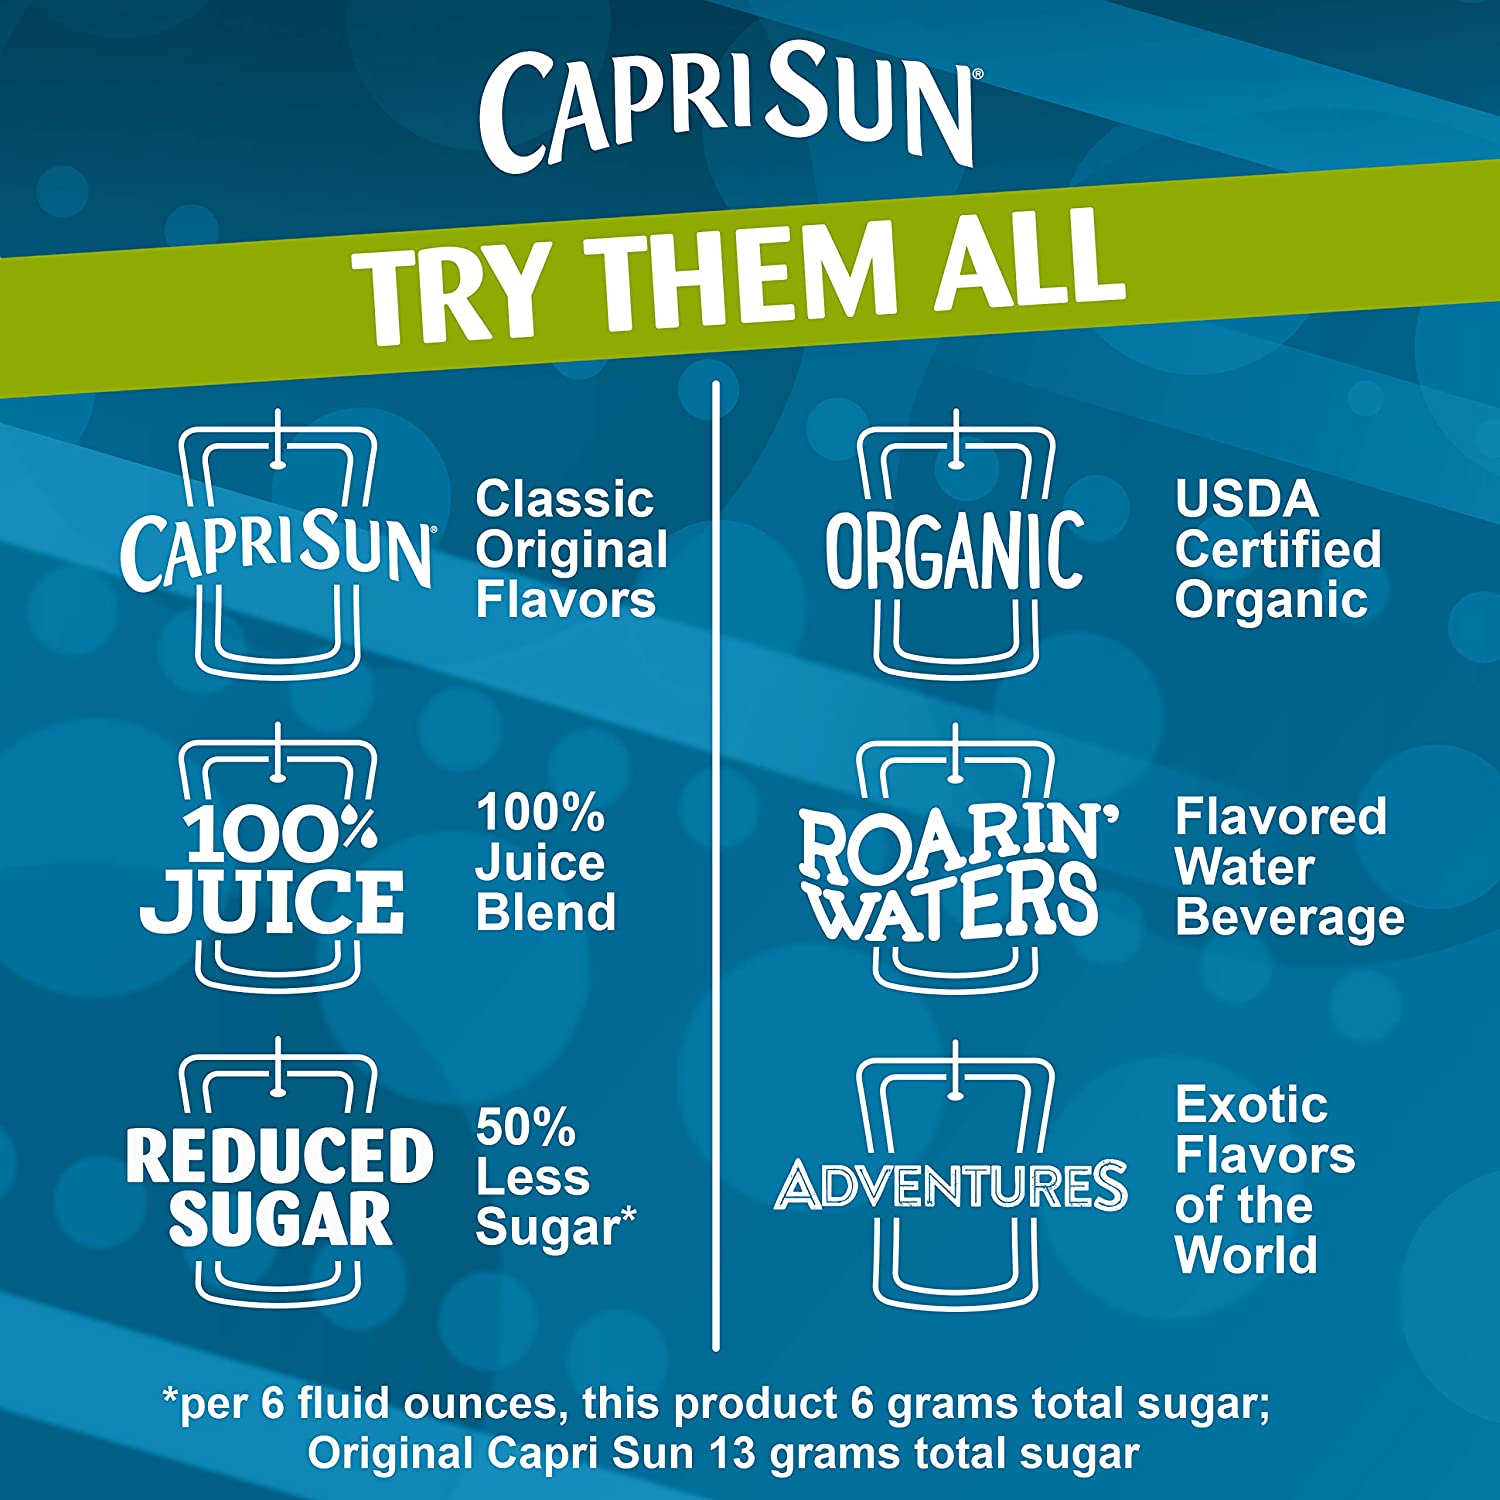 Capri Sun 100% Juice Variety Pack, Pack Of 40 Pouches